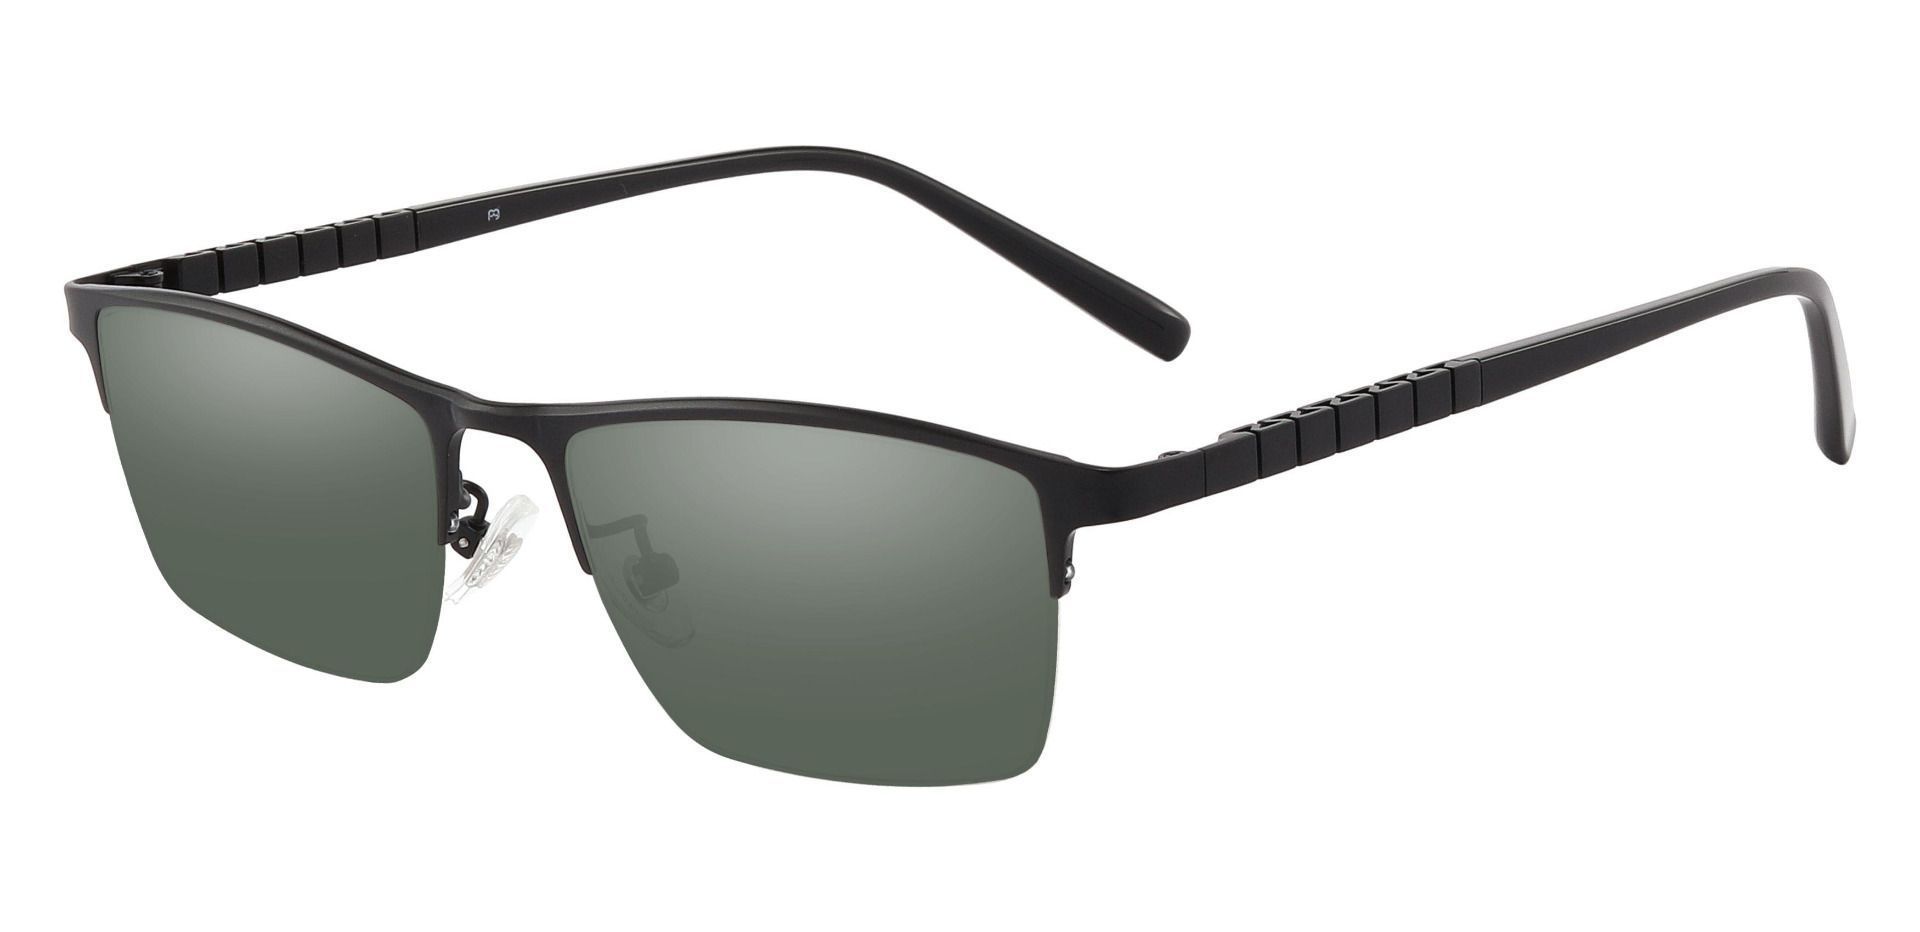 Maine Rectangle Lined Bifocal Sunglasses - Black Frame With Green Lenses